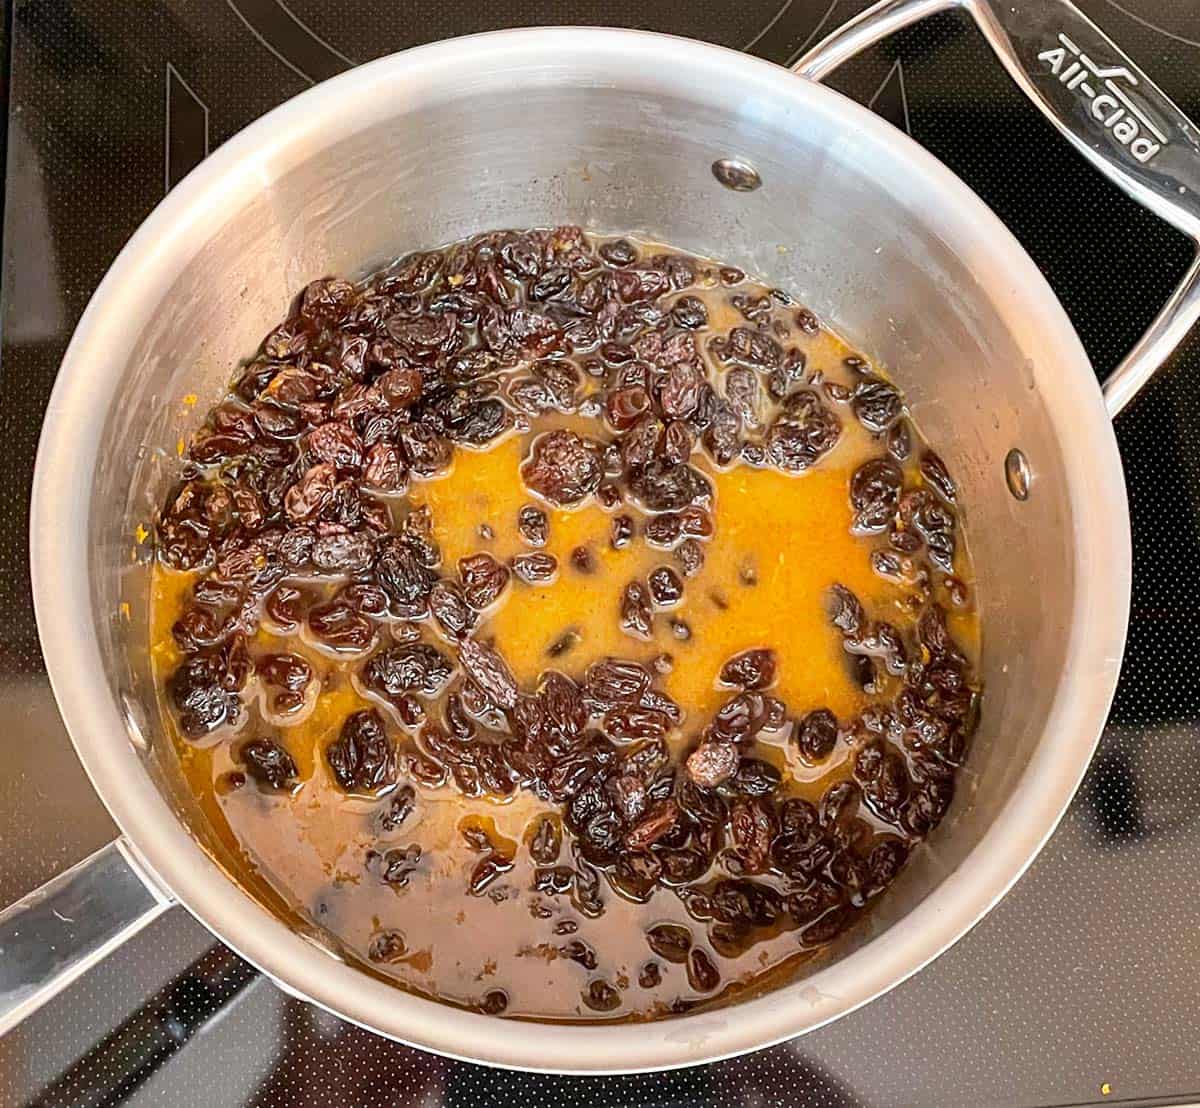 Cooking the raisin filling for the cookies with raisins, orange juice and zest along with rum extract.